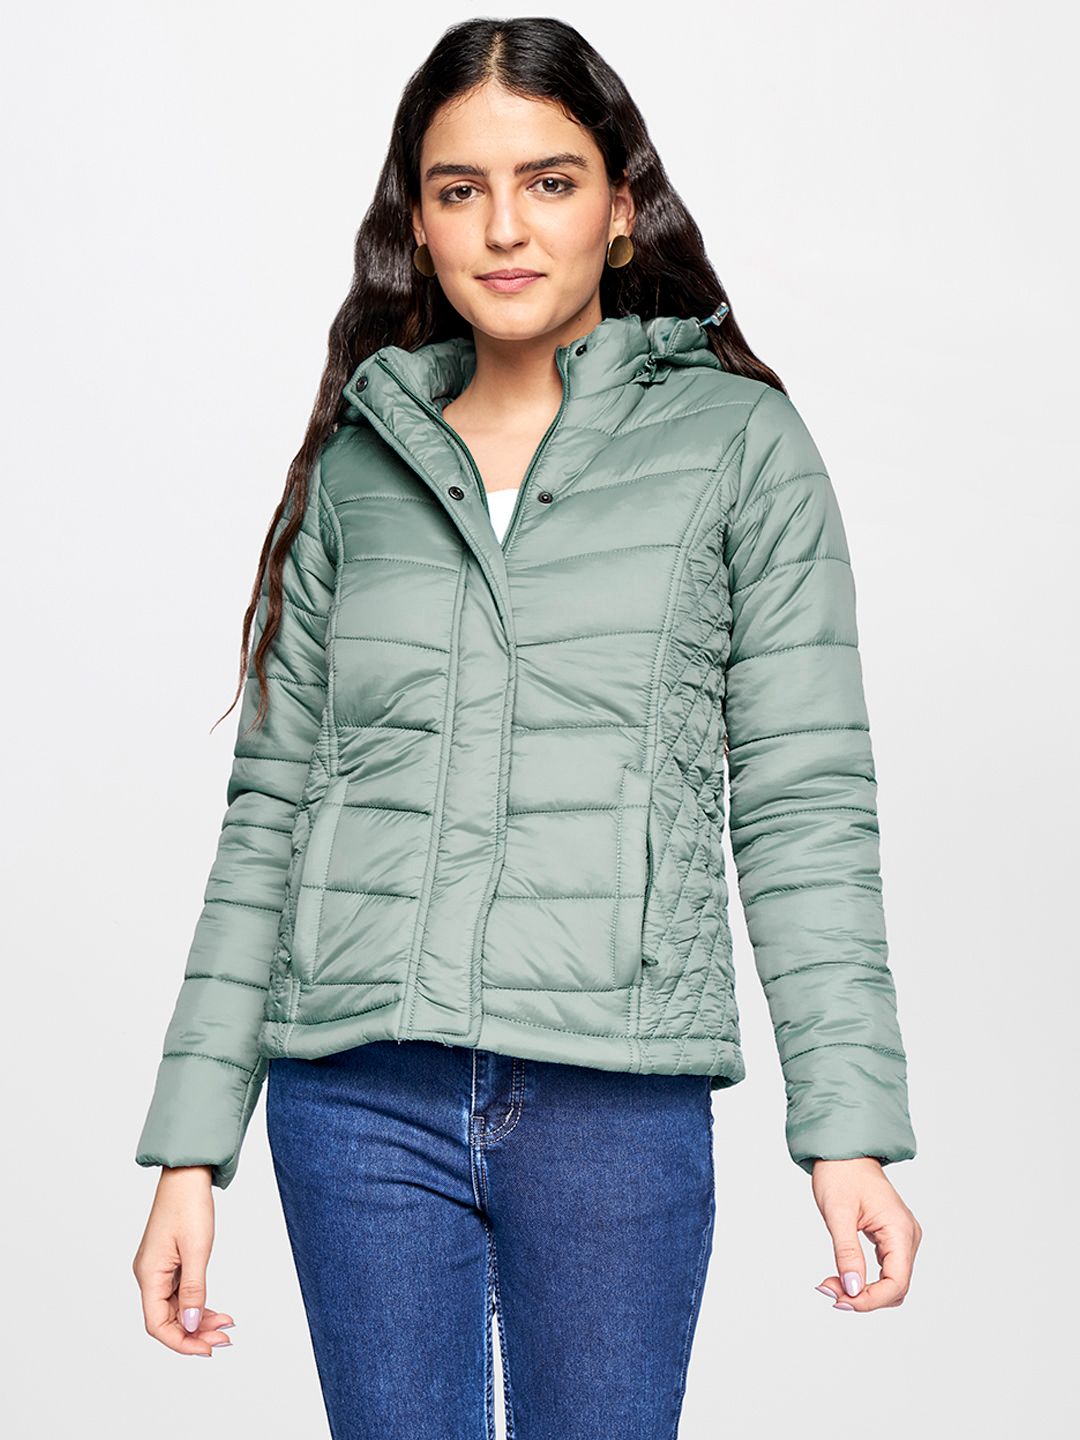 AND Women Teal Green Solid Hooded Padded Jacket Price in India